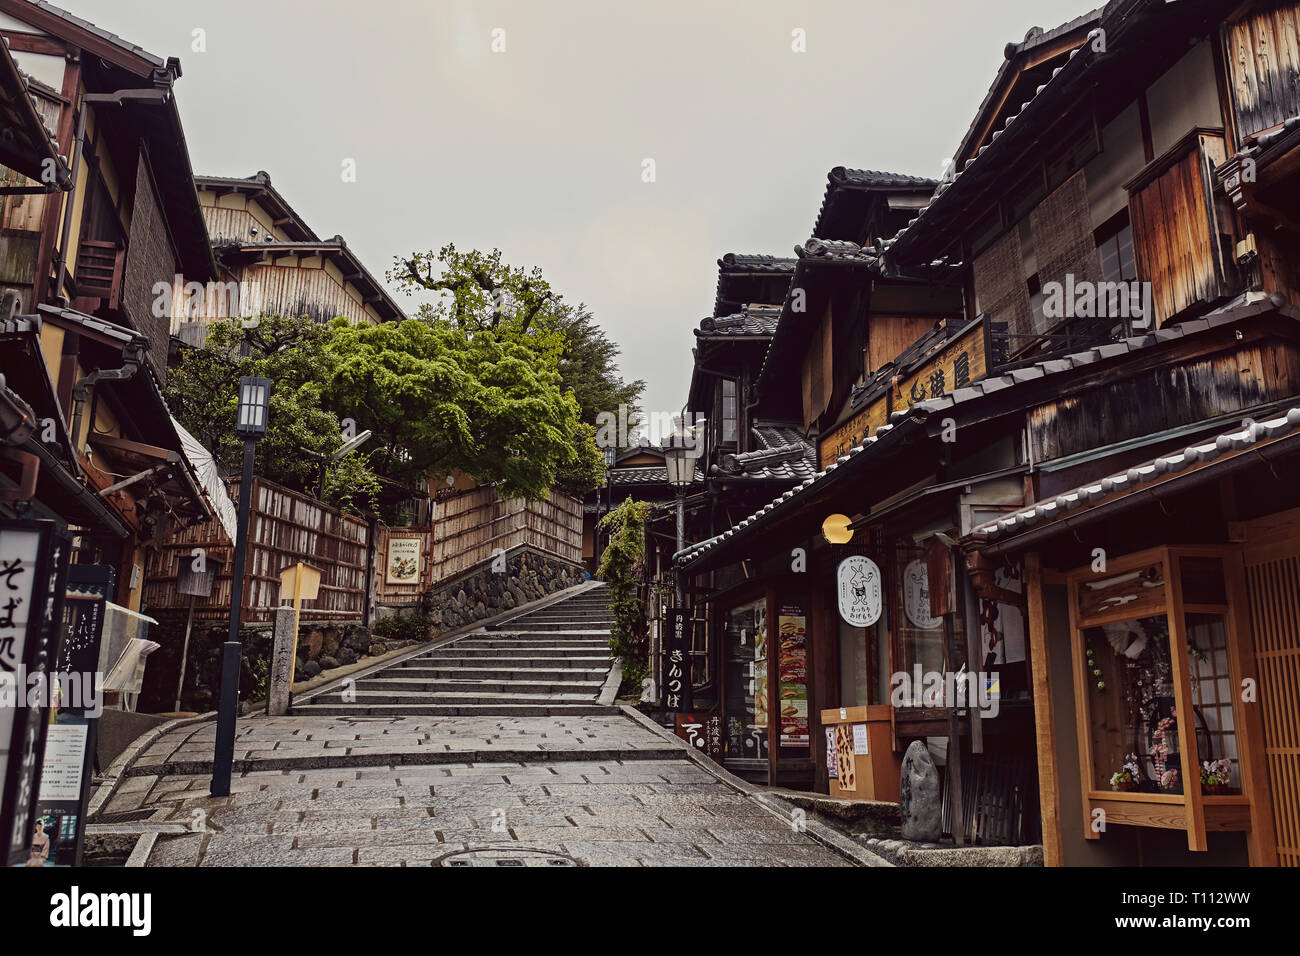 Traditional Japanese architecture and design on a street in Kyoto, Japan. Stock Photo